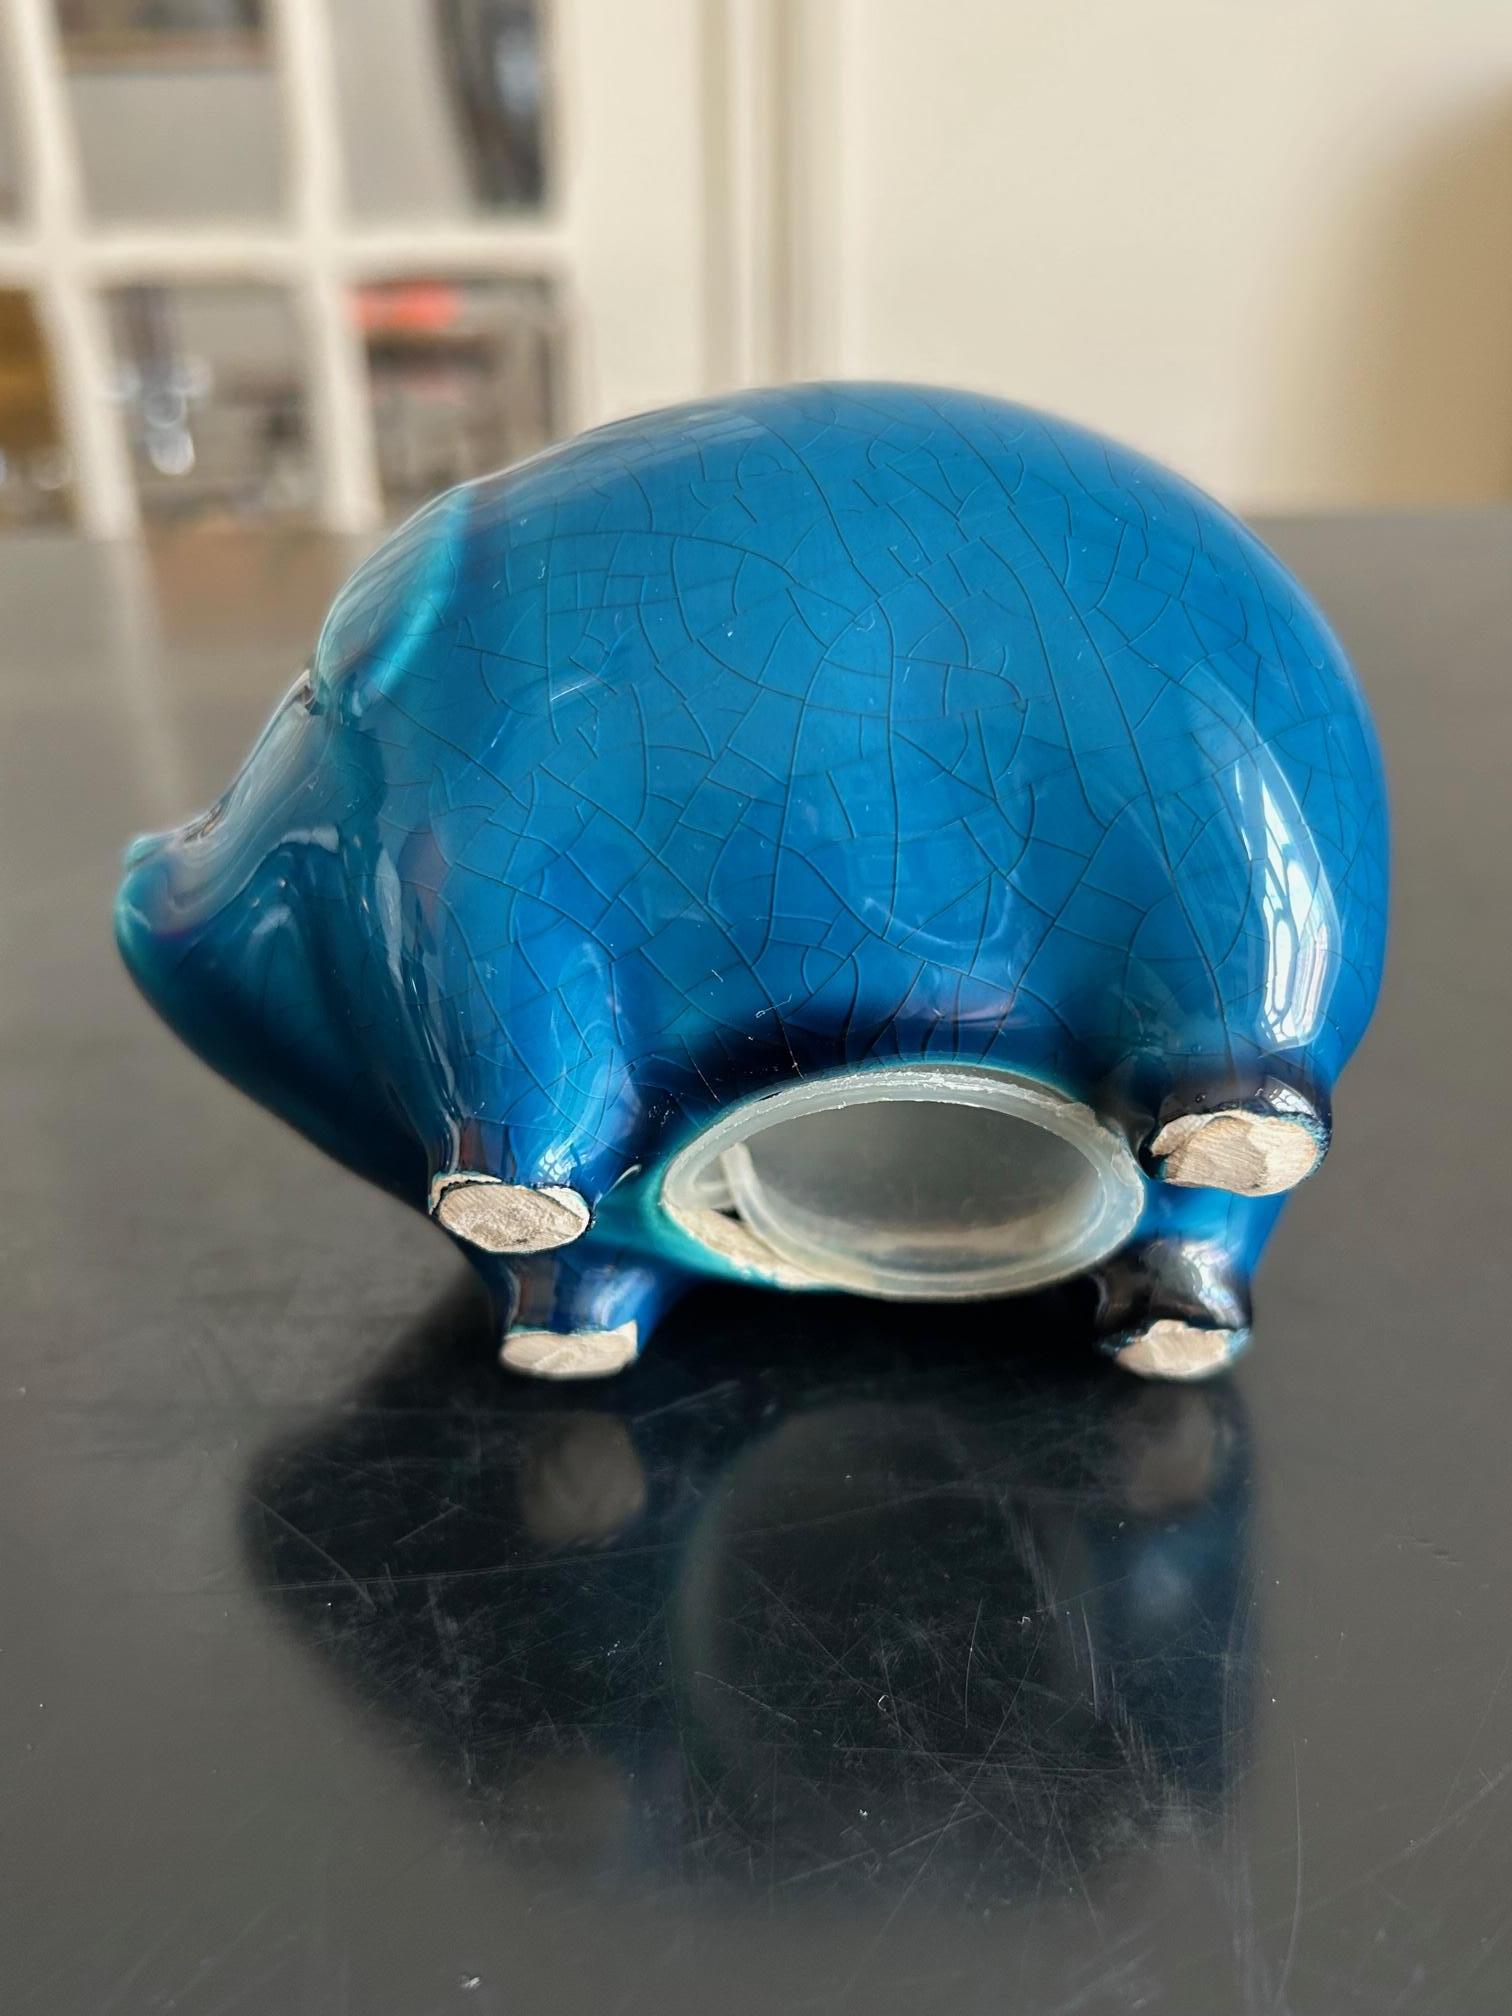 rare piece of blue enabled ceramic with fine crackles .
Pig from Pol Chambost in good original condition from the 1960's